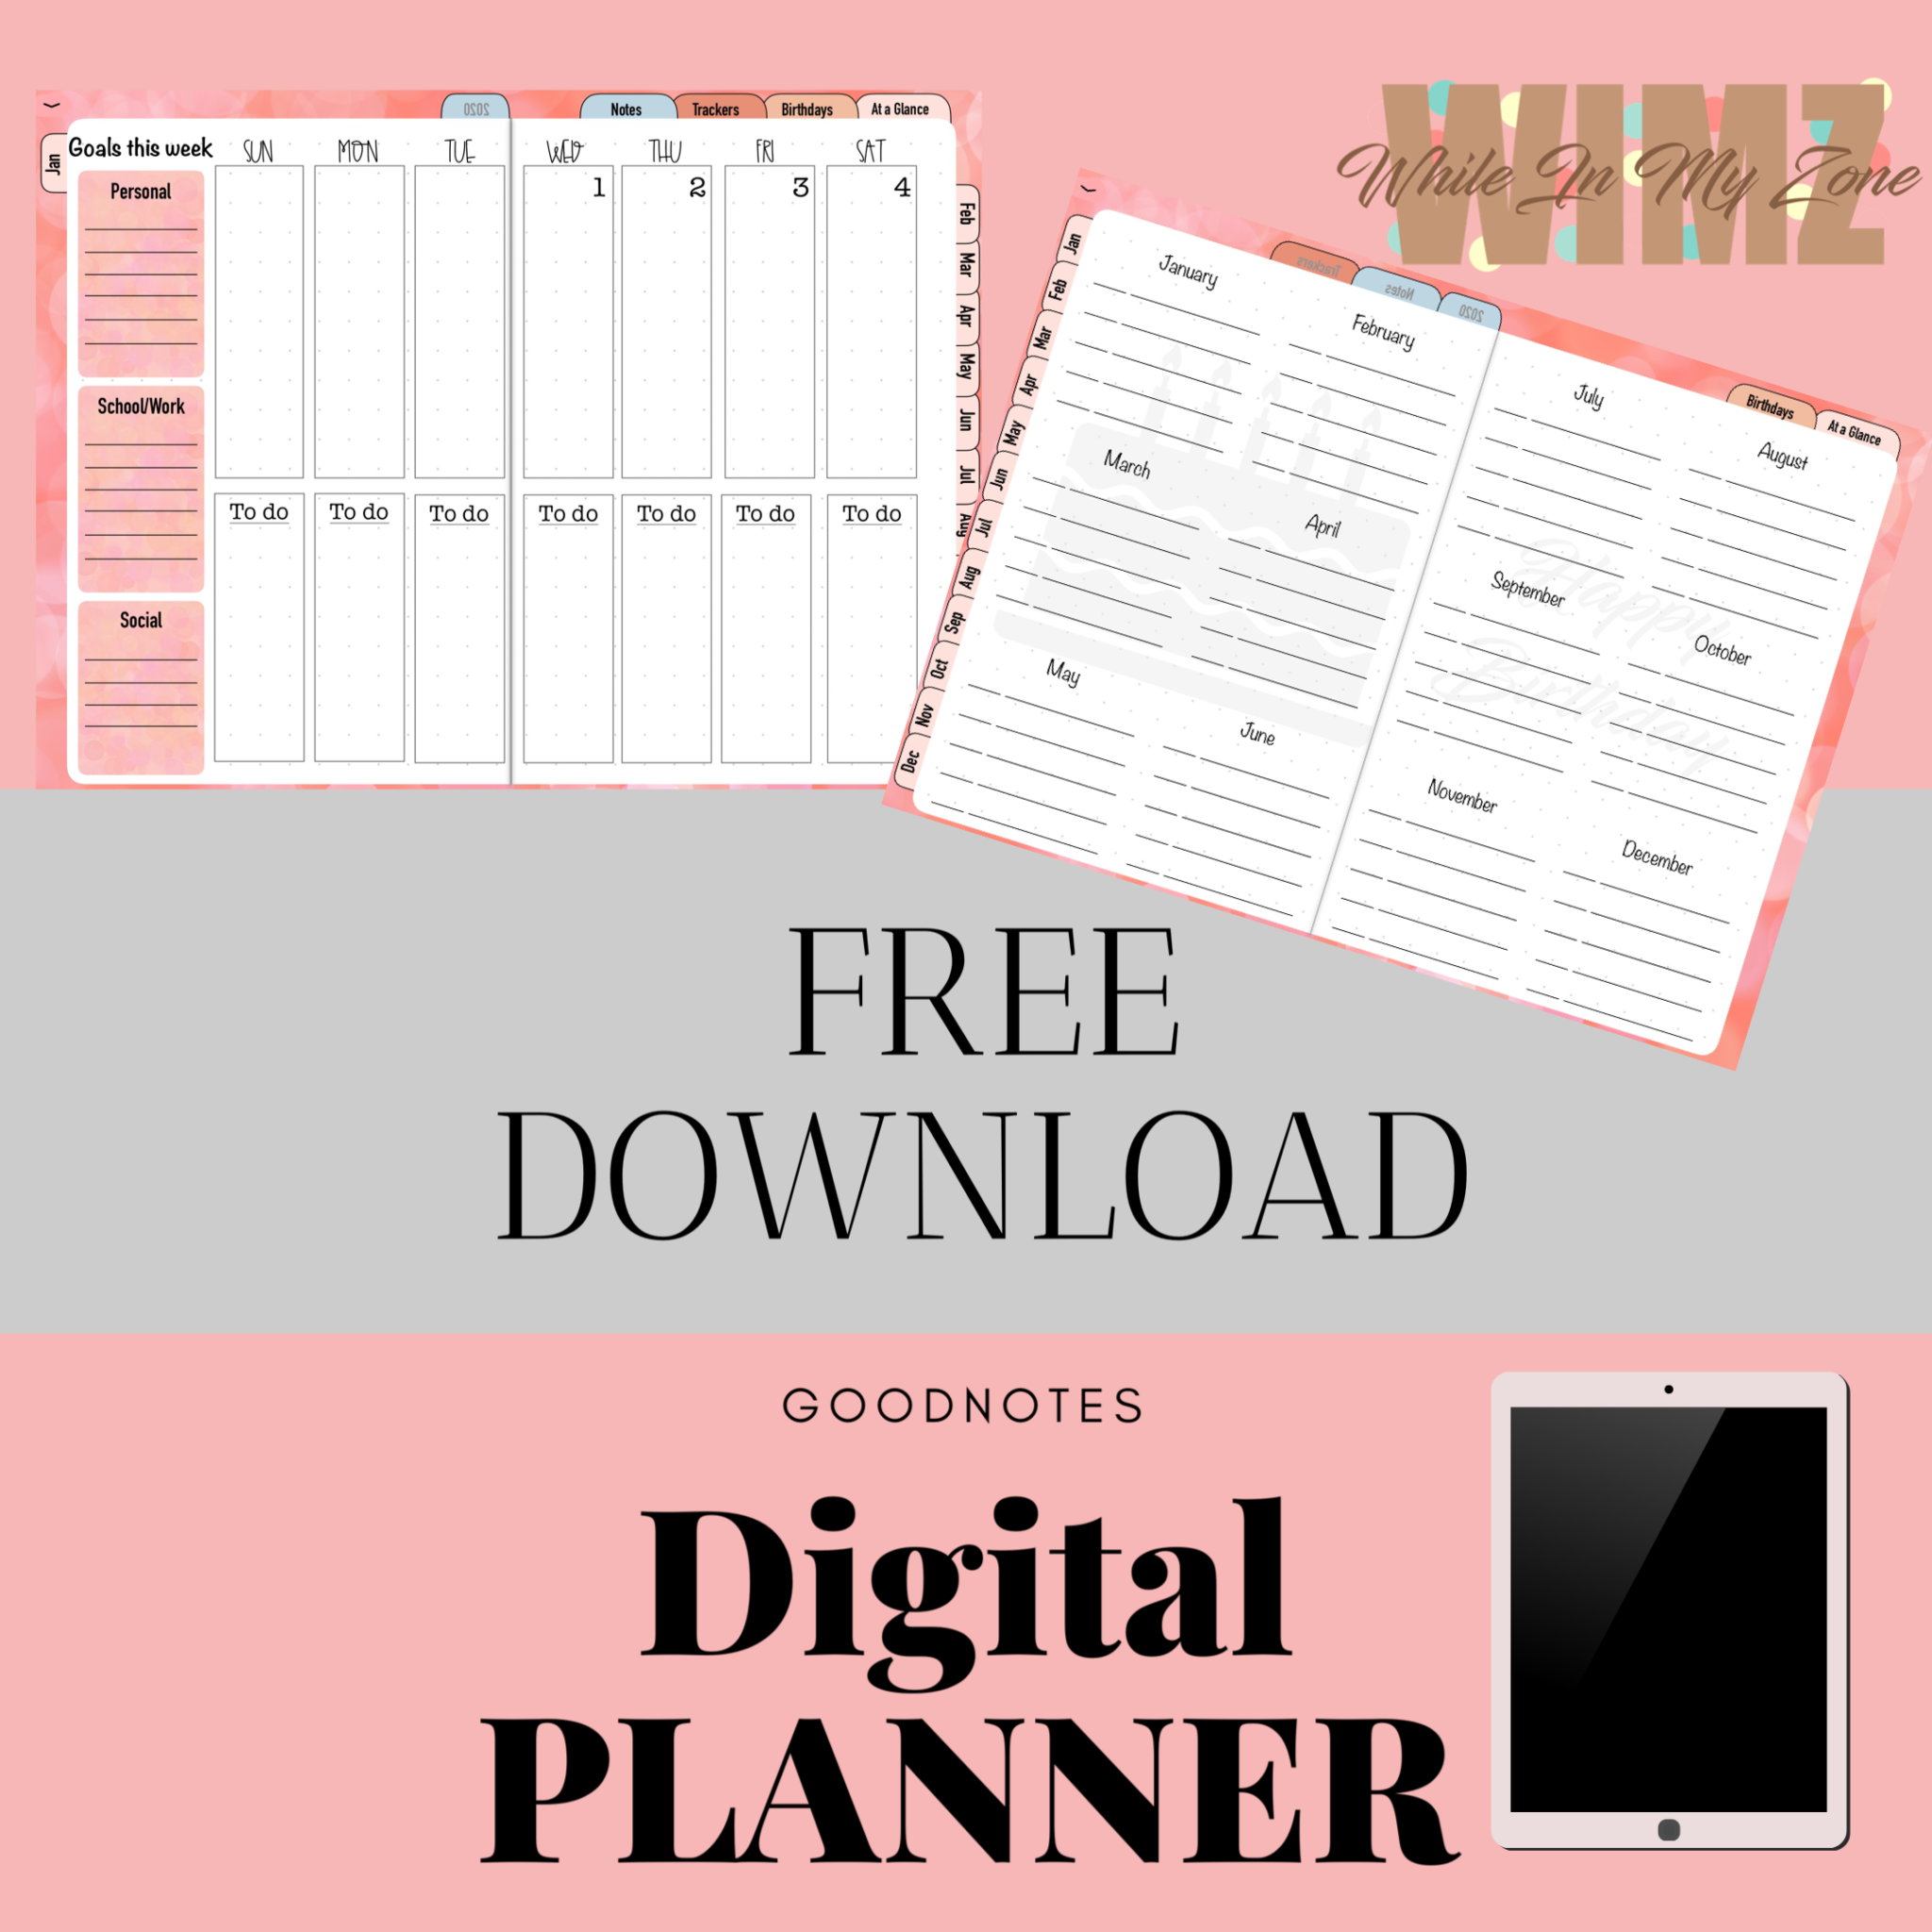 free-goodnotes-digital-planner-for-2020-while-in-my-zone